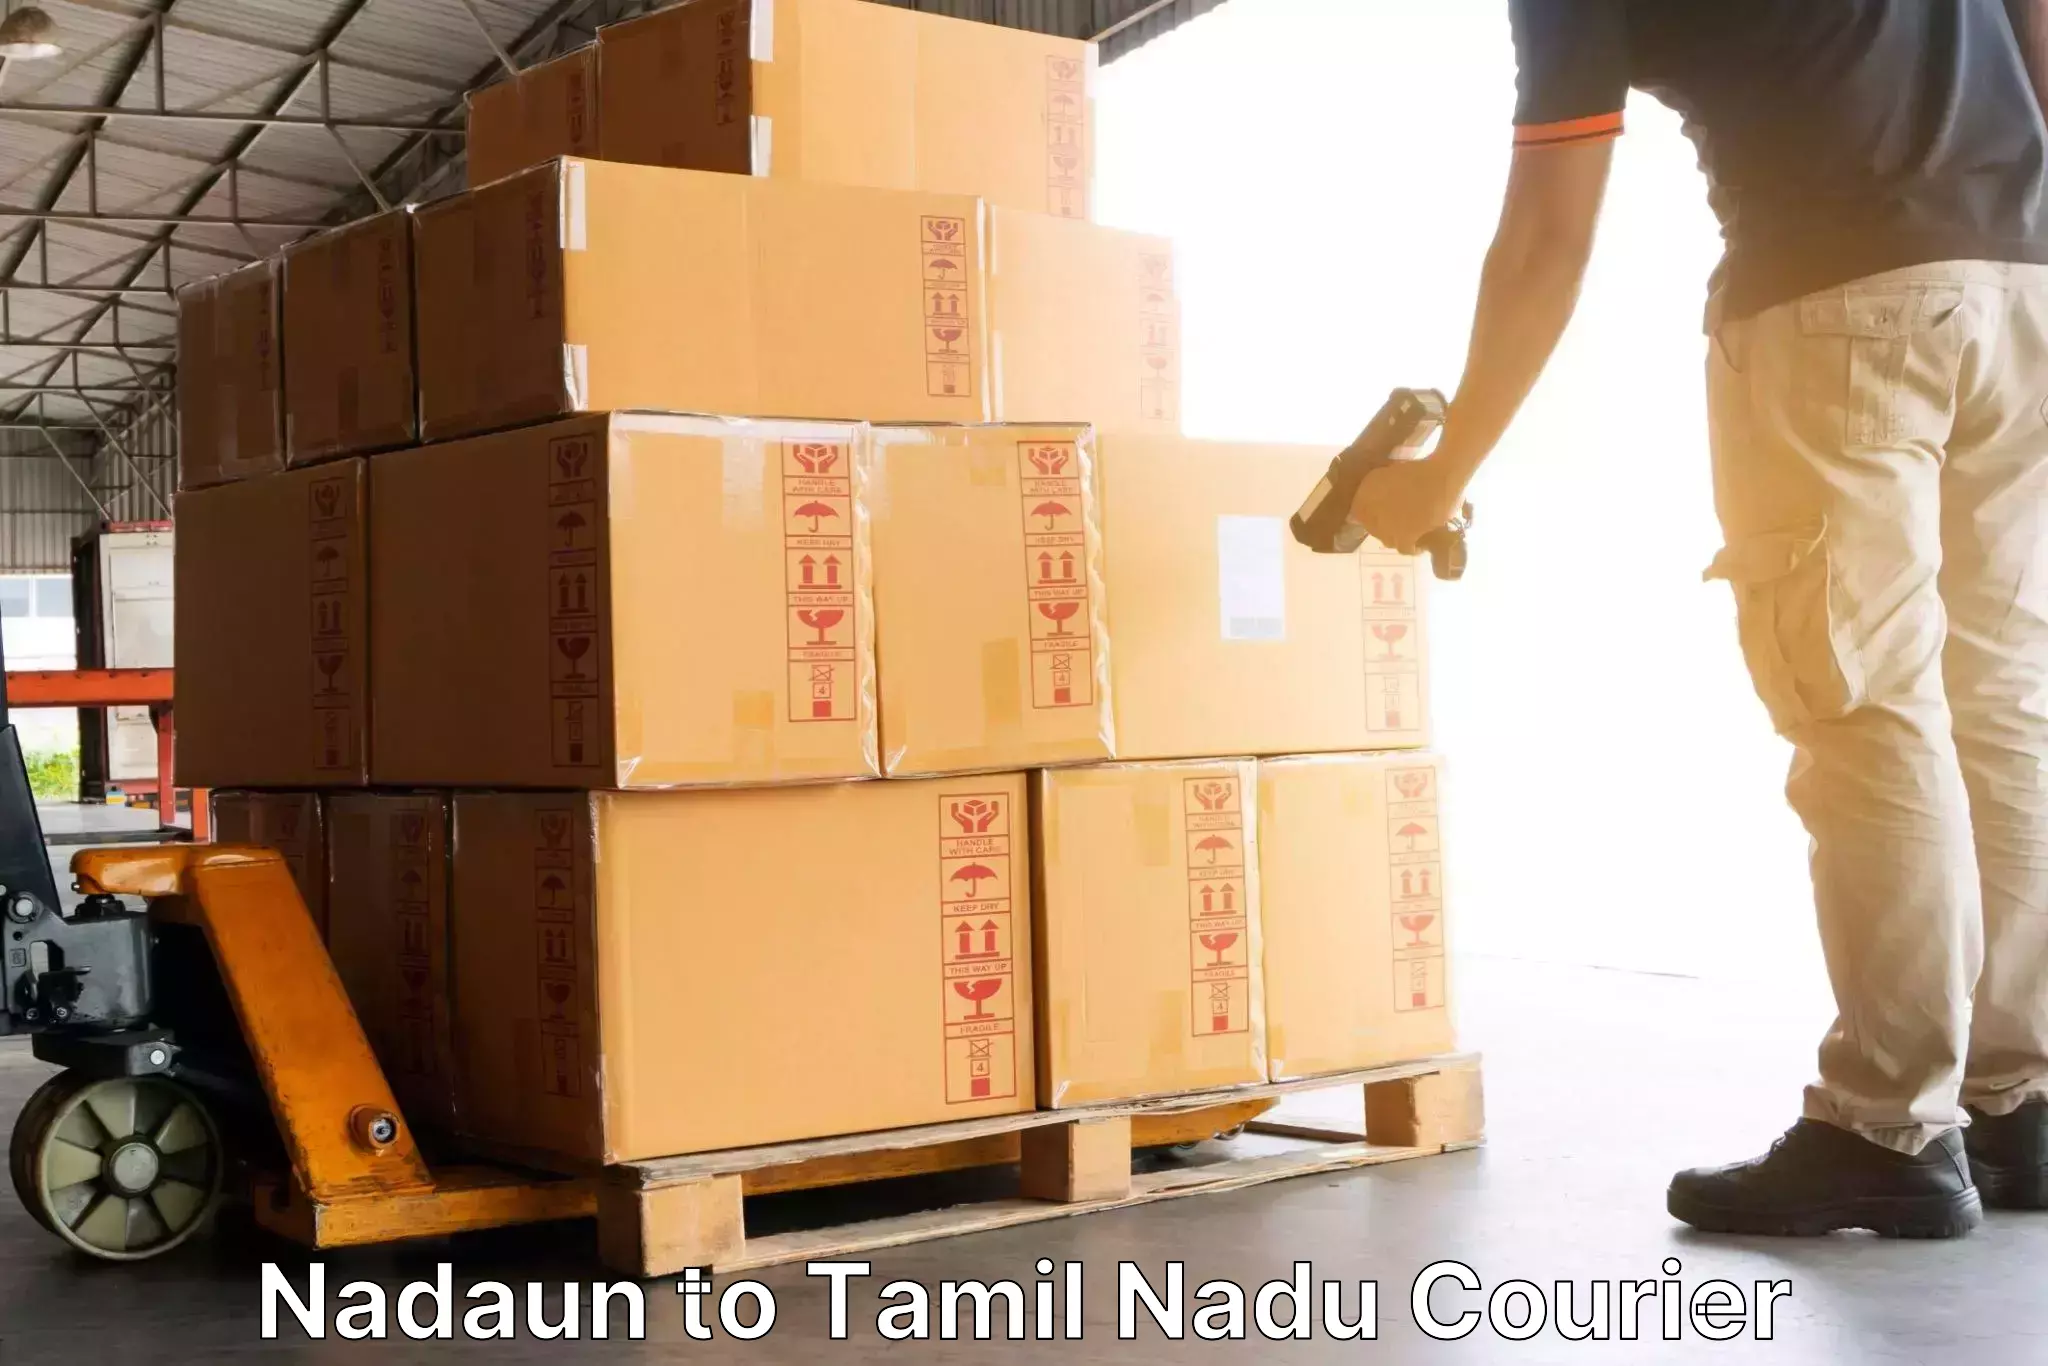 Efficient order fulfillment Nadaun to Ooty